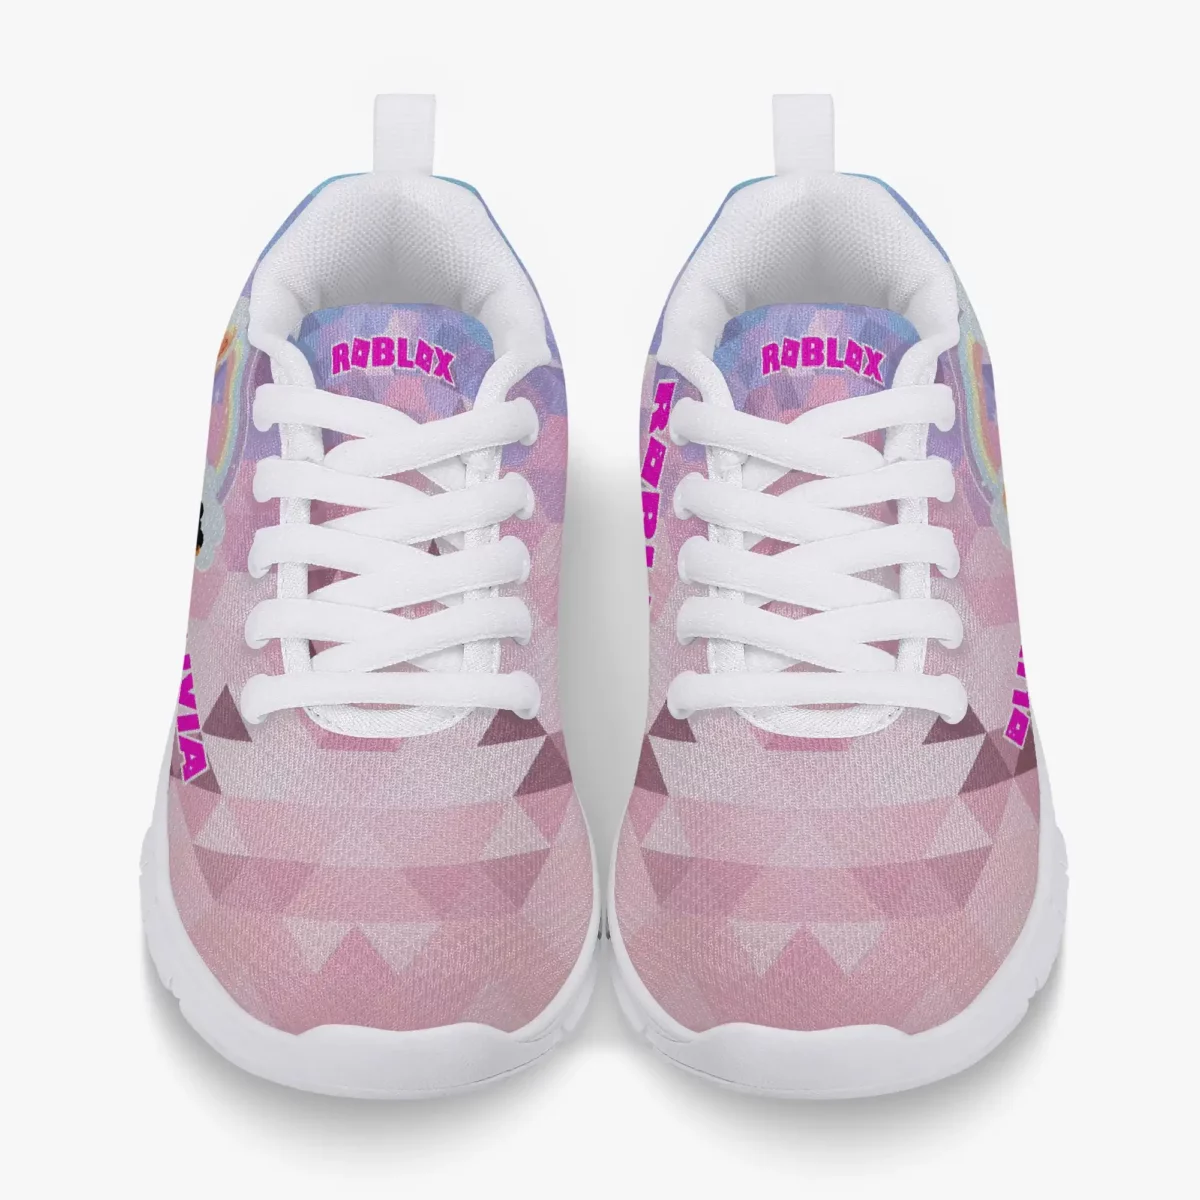 Roblox Girls Personalized Lightweight Mesh Sneakers Inspired by Roblox Girl Video Games Cool Kiddo 24